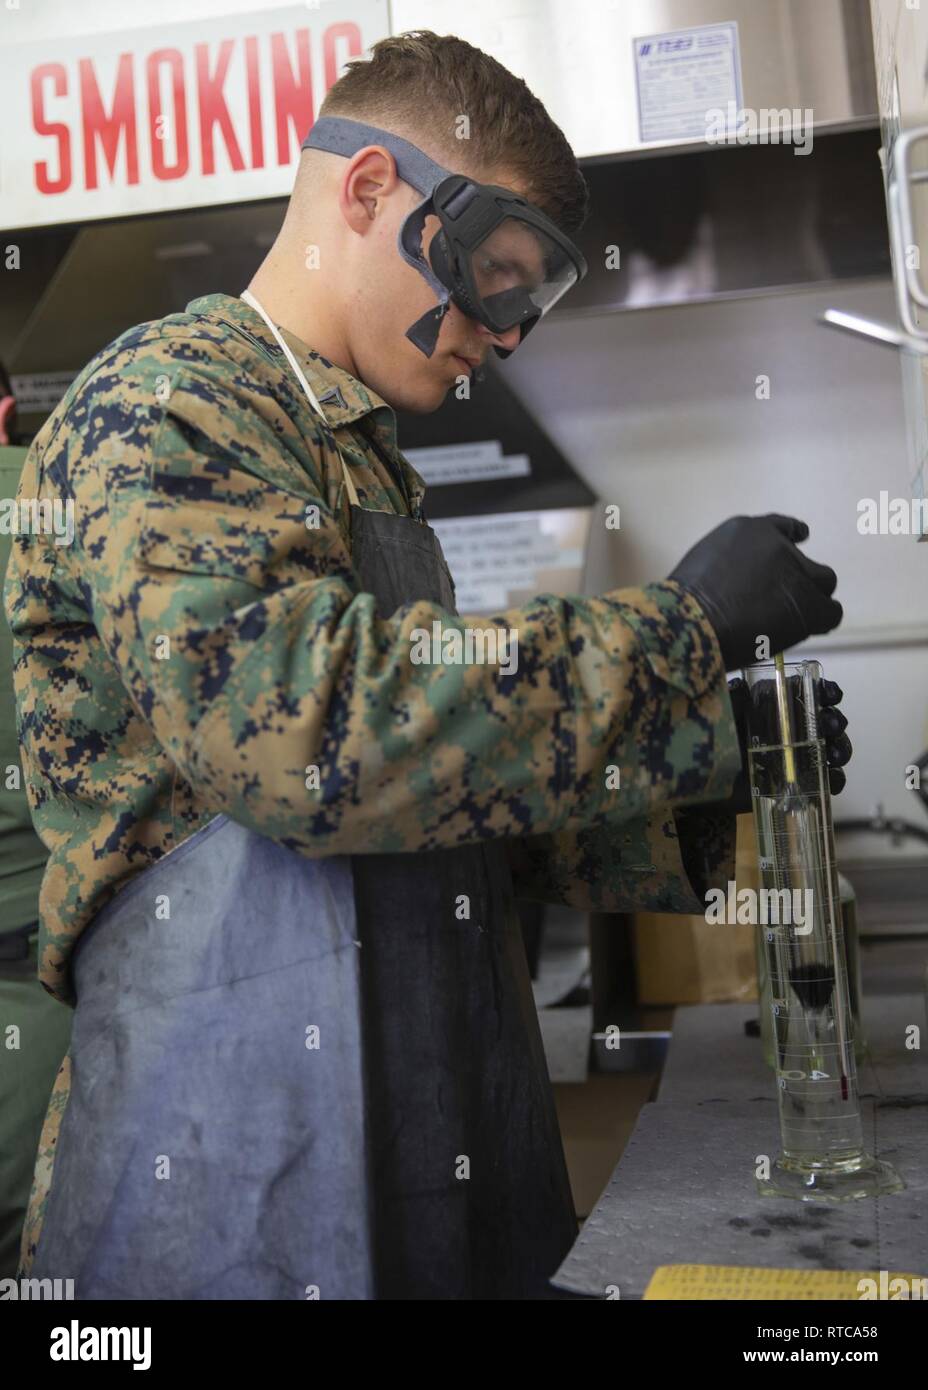 U.S. Marine Corps Lance Cpl. Chance Rogers, bulk fuel specialist, Headquarters & Headquarters Squadron, Marine Corps Air Station (MCAS) Camp Pendleton, examines the tempurature of fuel at MCAS Camp Pendleton, California, Feb. 12, 2019. Every morning, bulk fuel specialists gather samples to ensure fuel is clear of harmful contaminants. Stock Photo